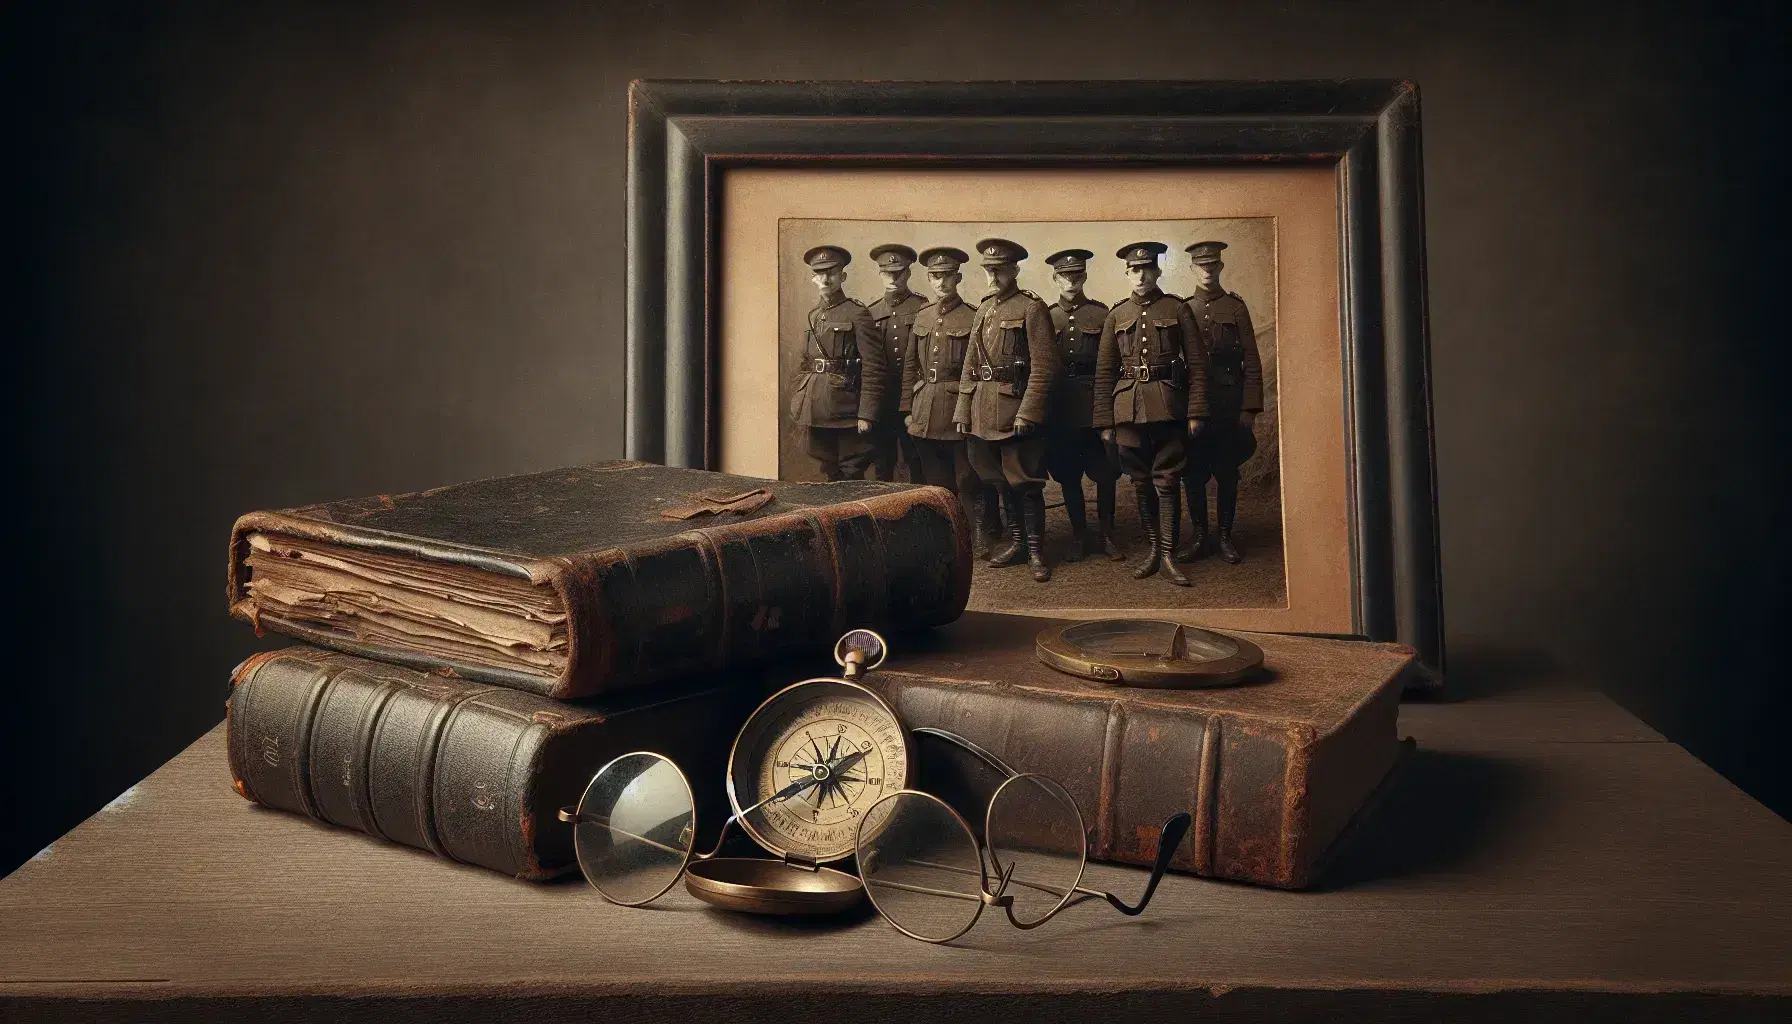 Collection of antique objects: leather book, brass compass, round glasses, black and white photos of soldiers and military cap.